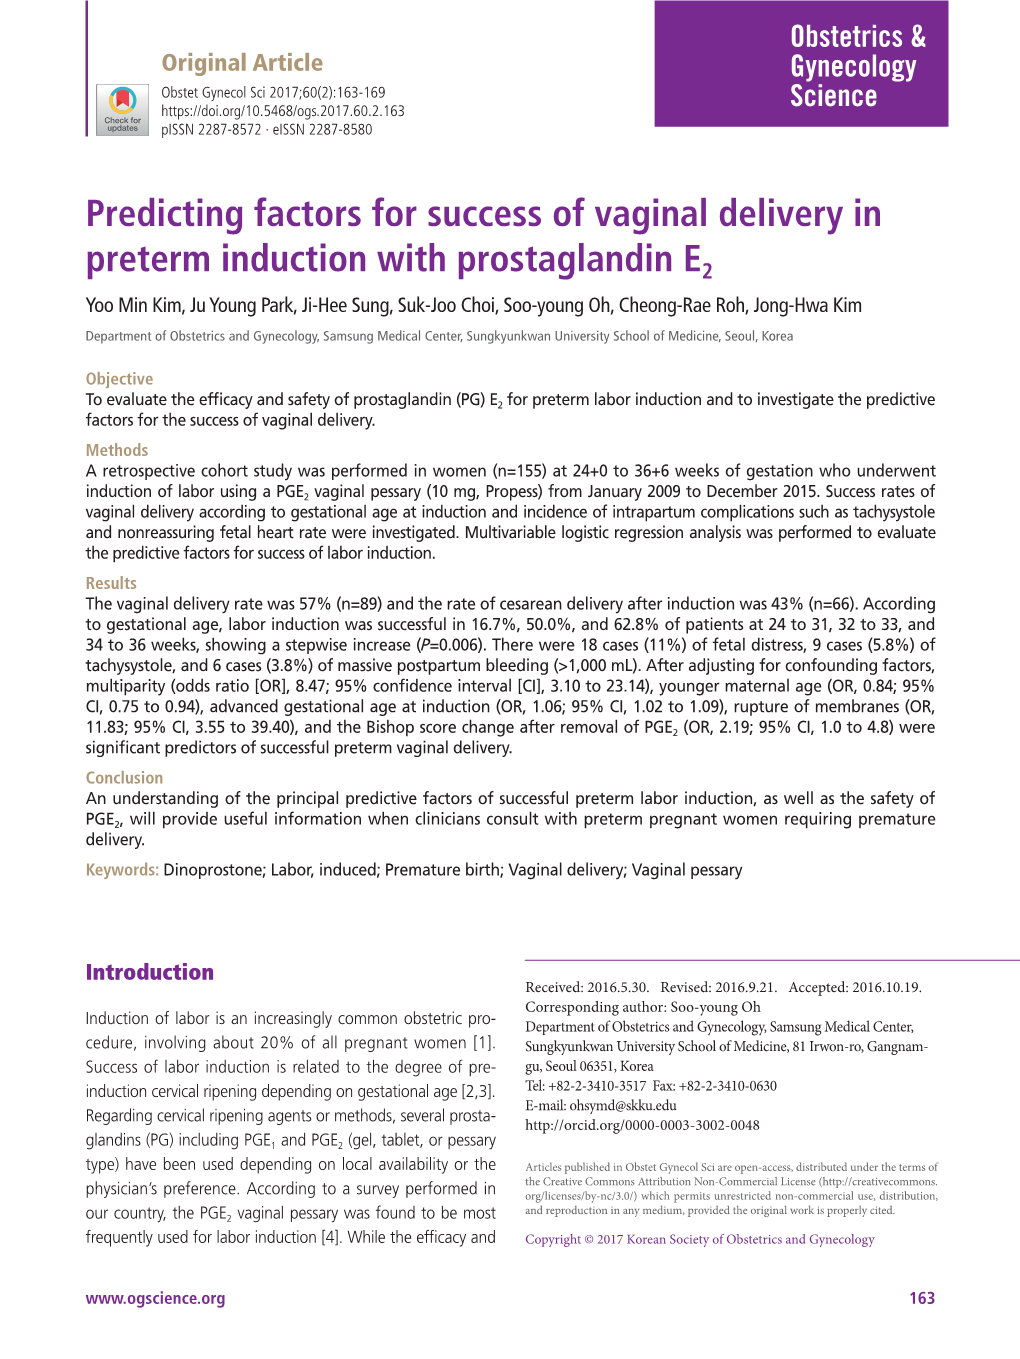 Predicting Factors for Success of Vaginal Delivery in Preterm Induction with Prostaglandin E2